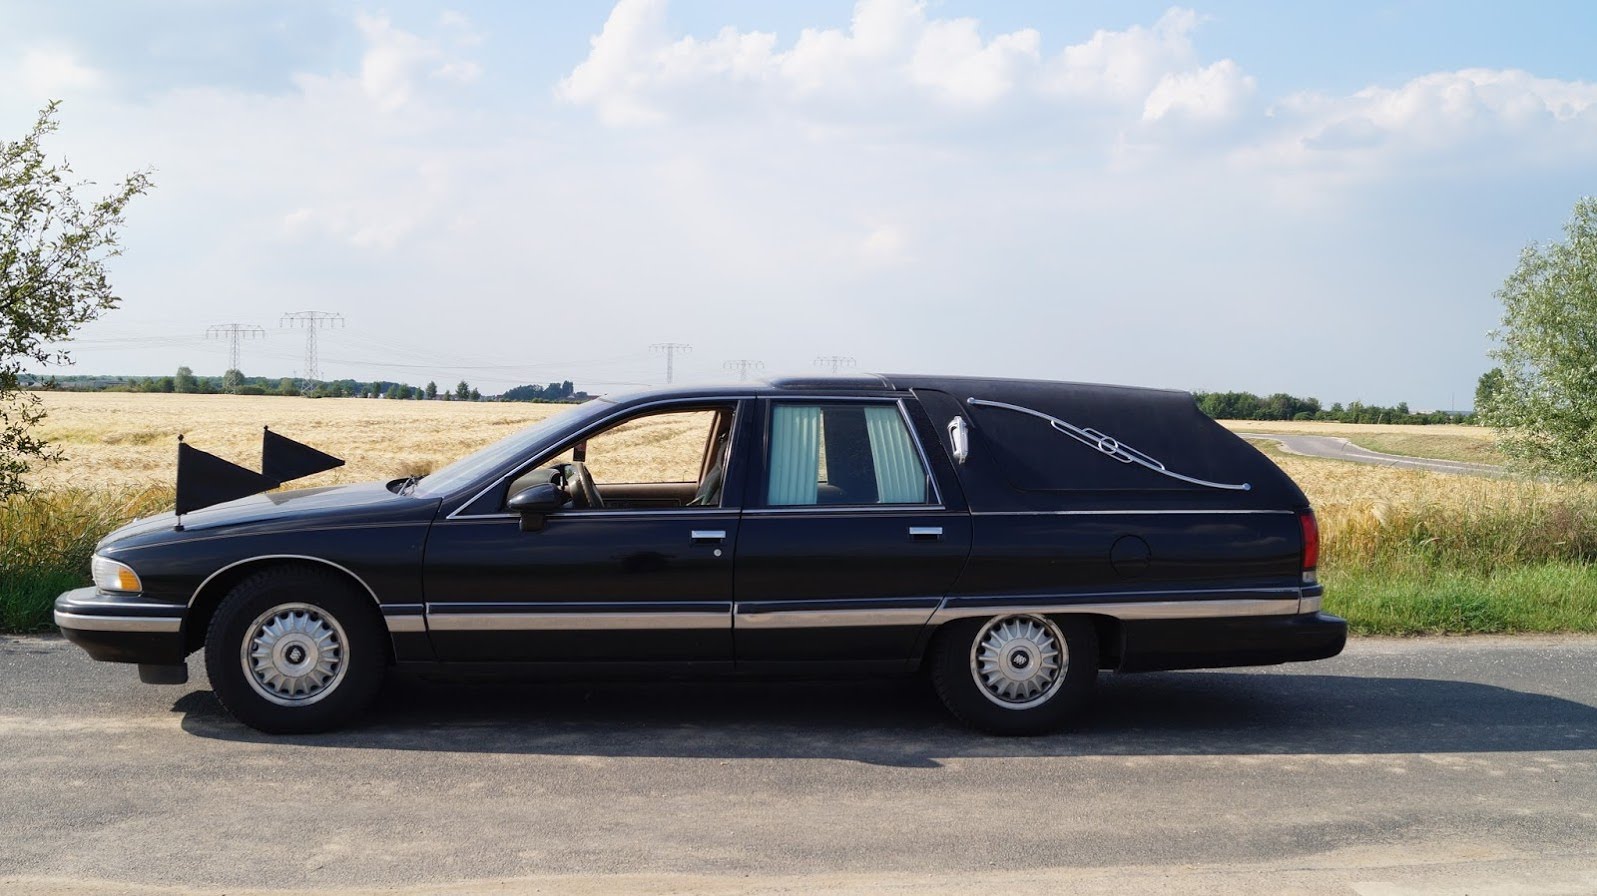 Buick Roadmaster Hearse Backgrounds, Compatible - PC, Mobile, Gadgets| 1597x896 px